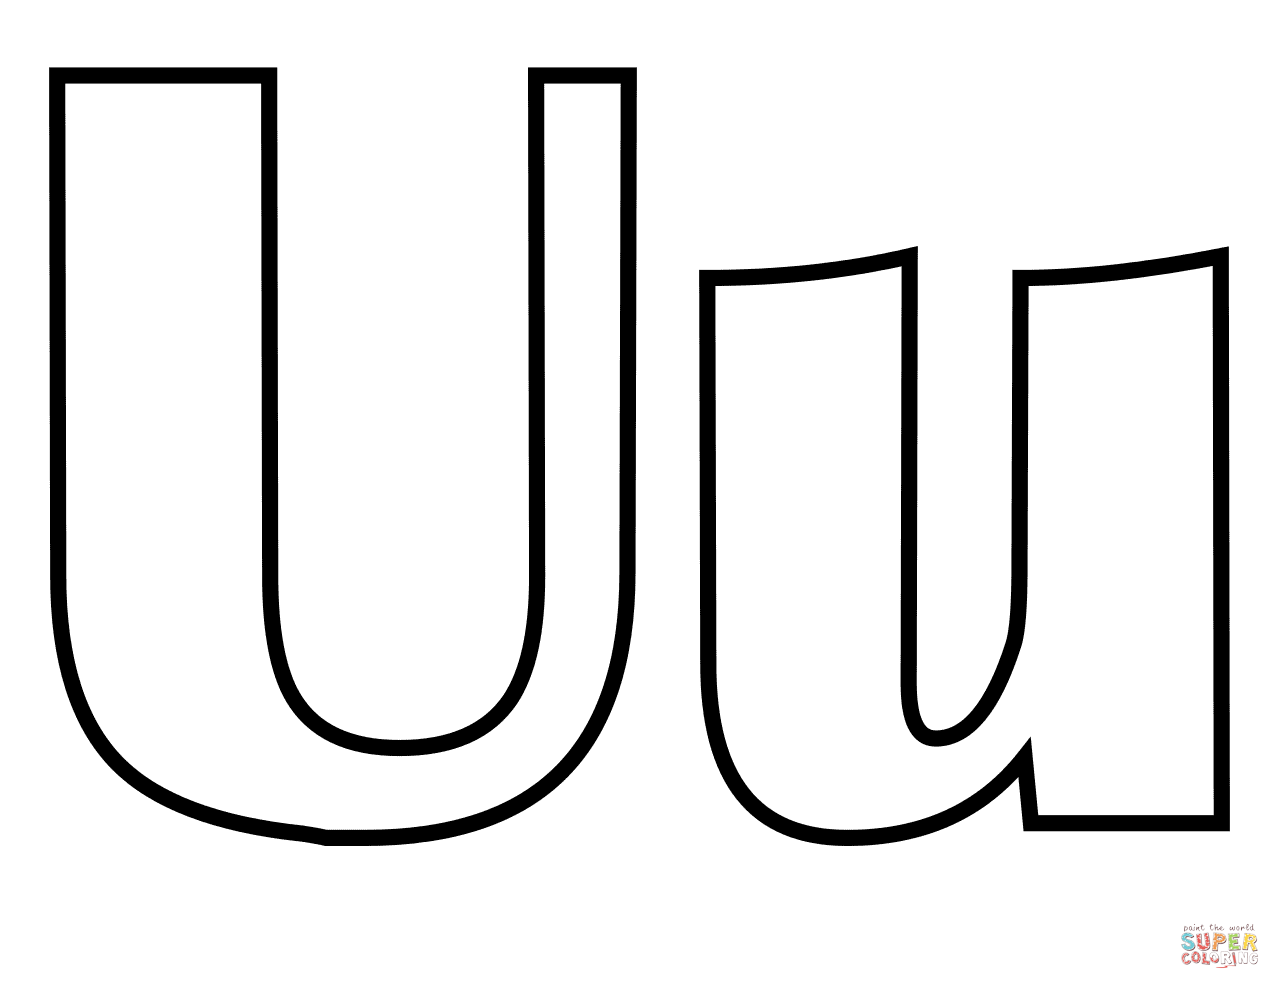 Classic letter u coloring page free printable coloring pages alphabet coloring pages preschool coloring pages lettering